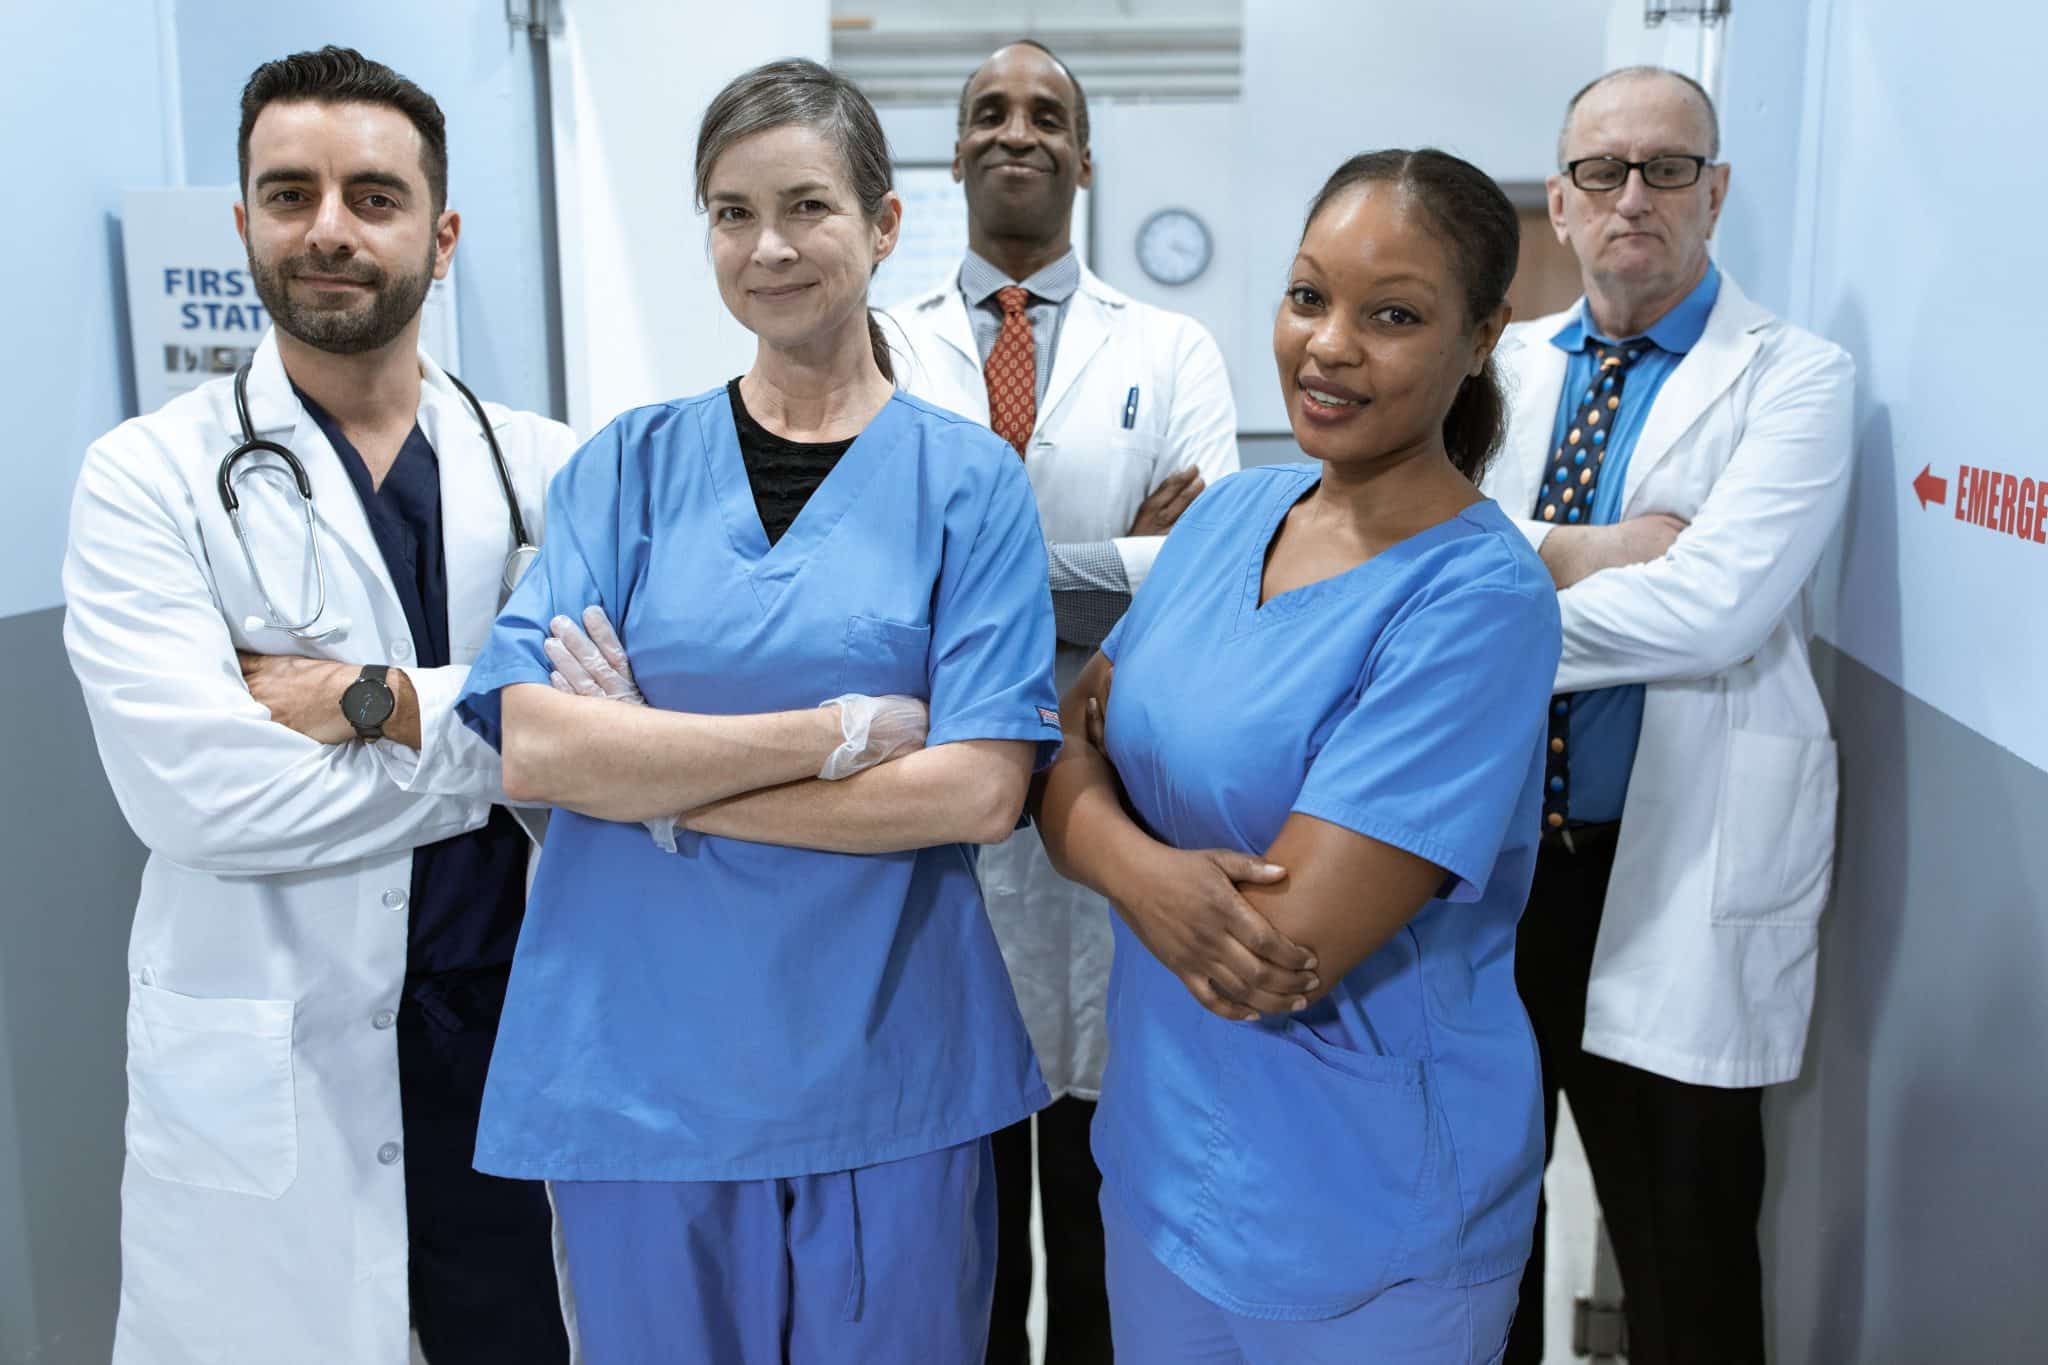 A diverse group of medical professionals, including Canada work permit holders, standing confidently in an emergency room environment.